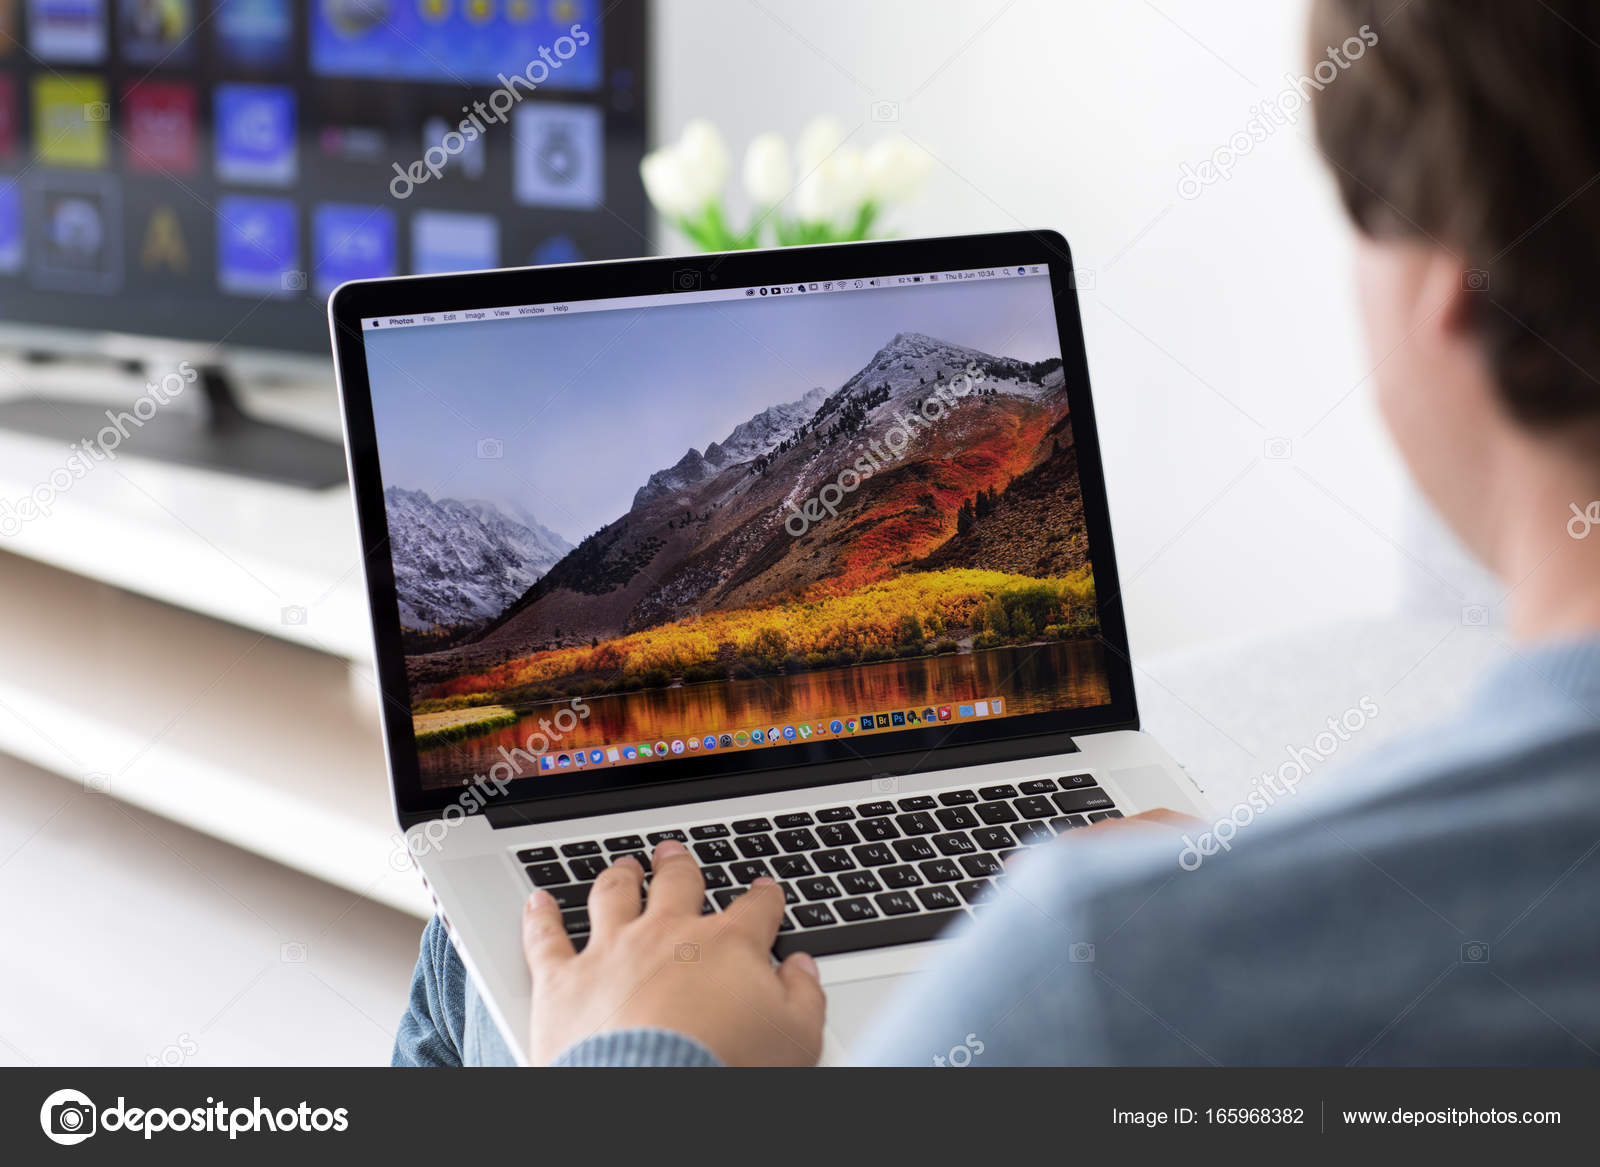 Connect Your Macbook To Your Tv - HD Wallpaper 